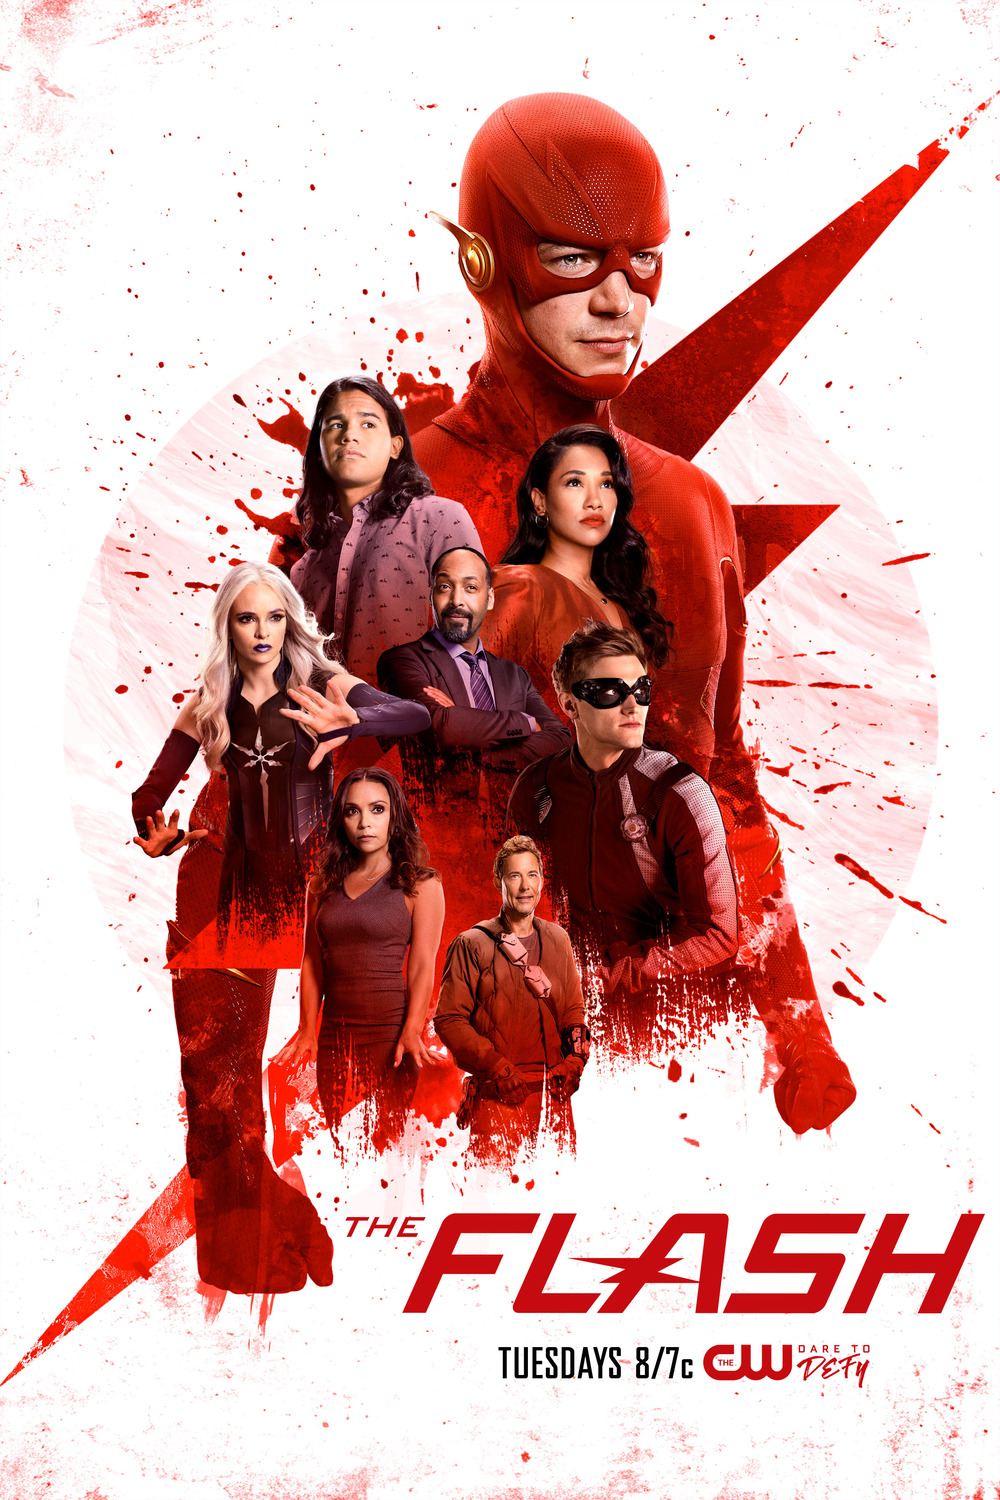 Extra Large TV Poster Image for The Flash (#51 of 65)